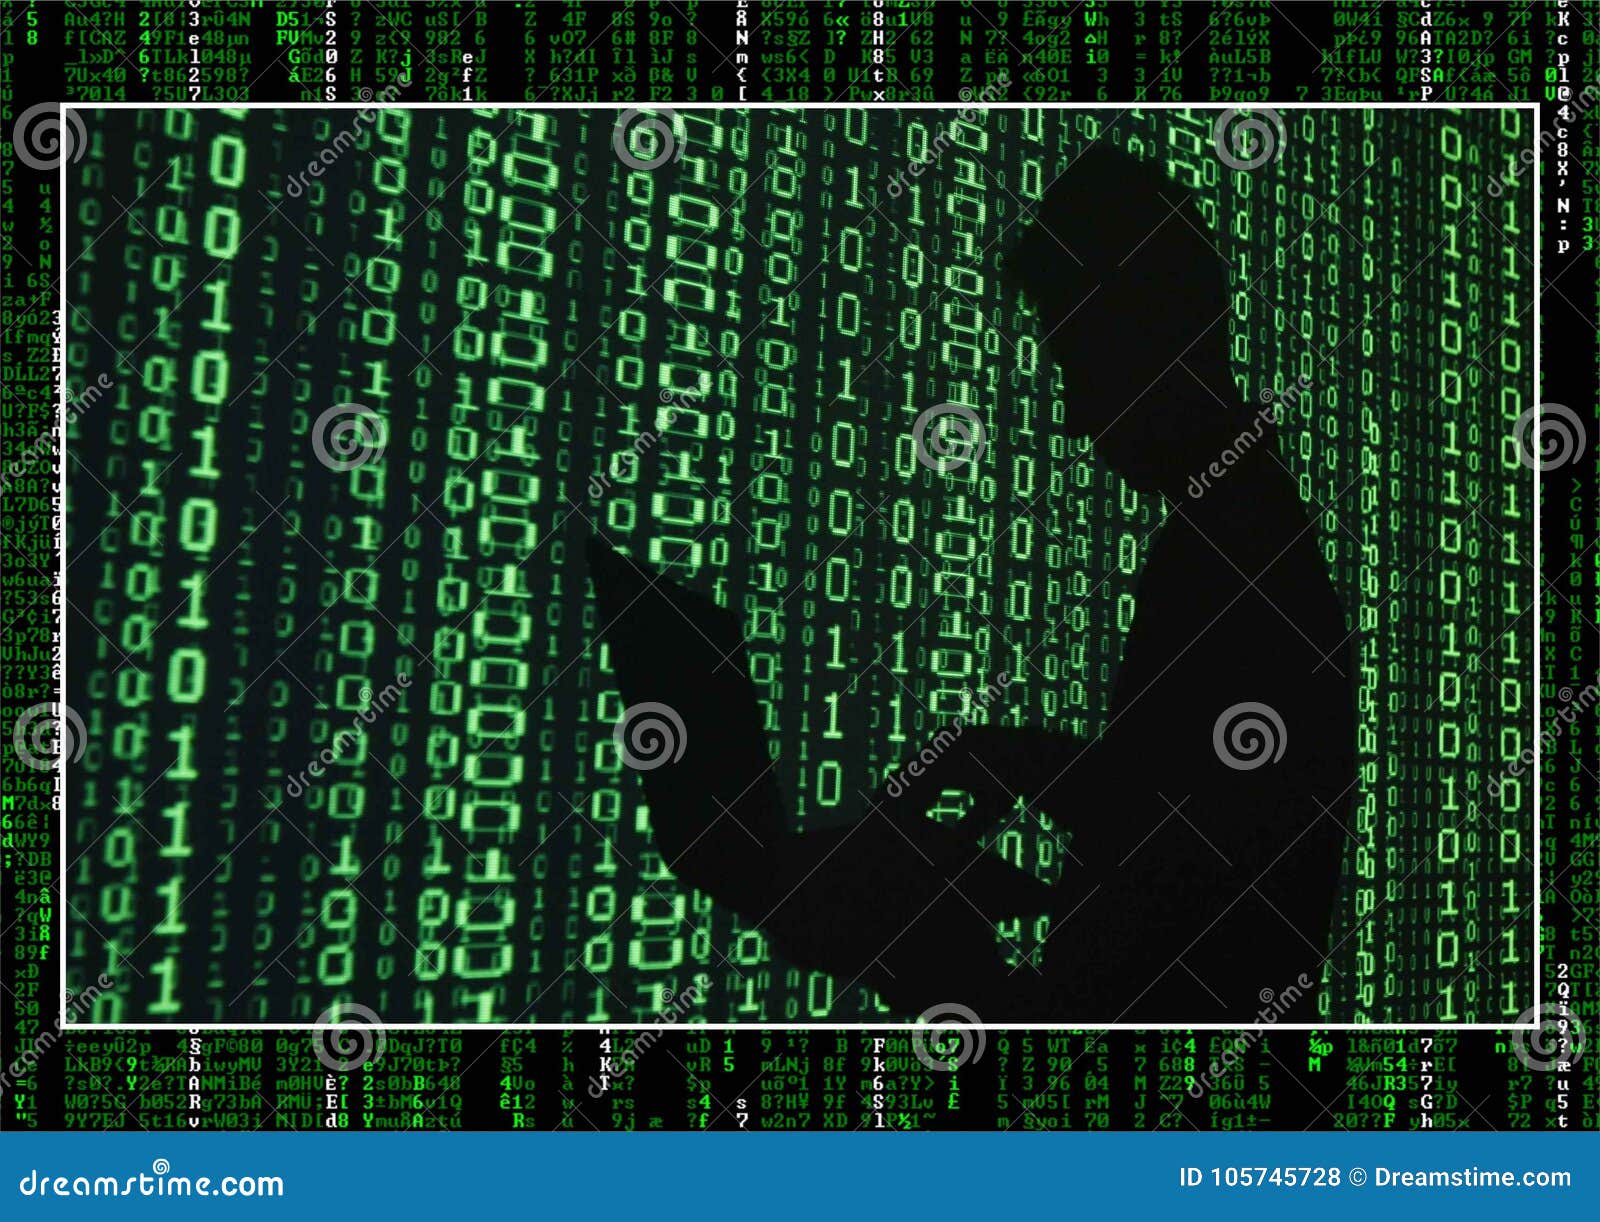 499 Hacker Wallpaper Photos Free Royalty Free Stock Photos From Dreamstime